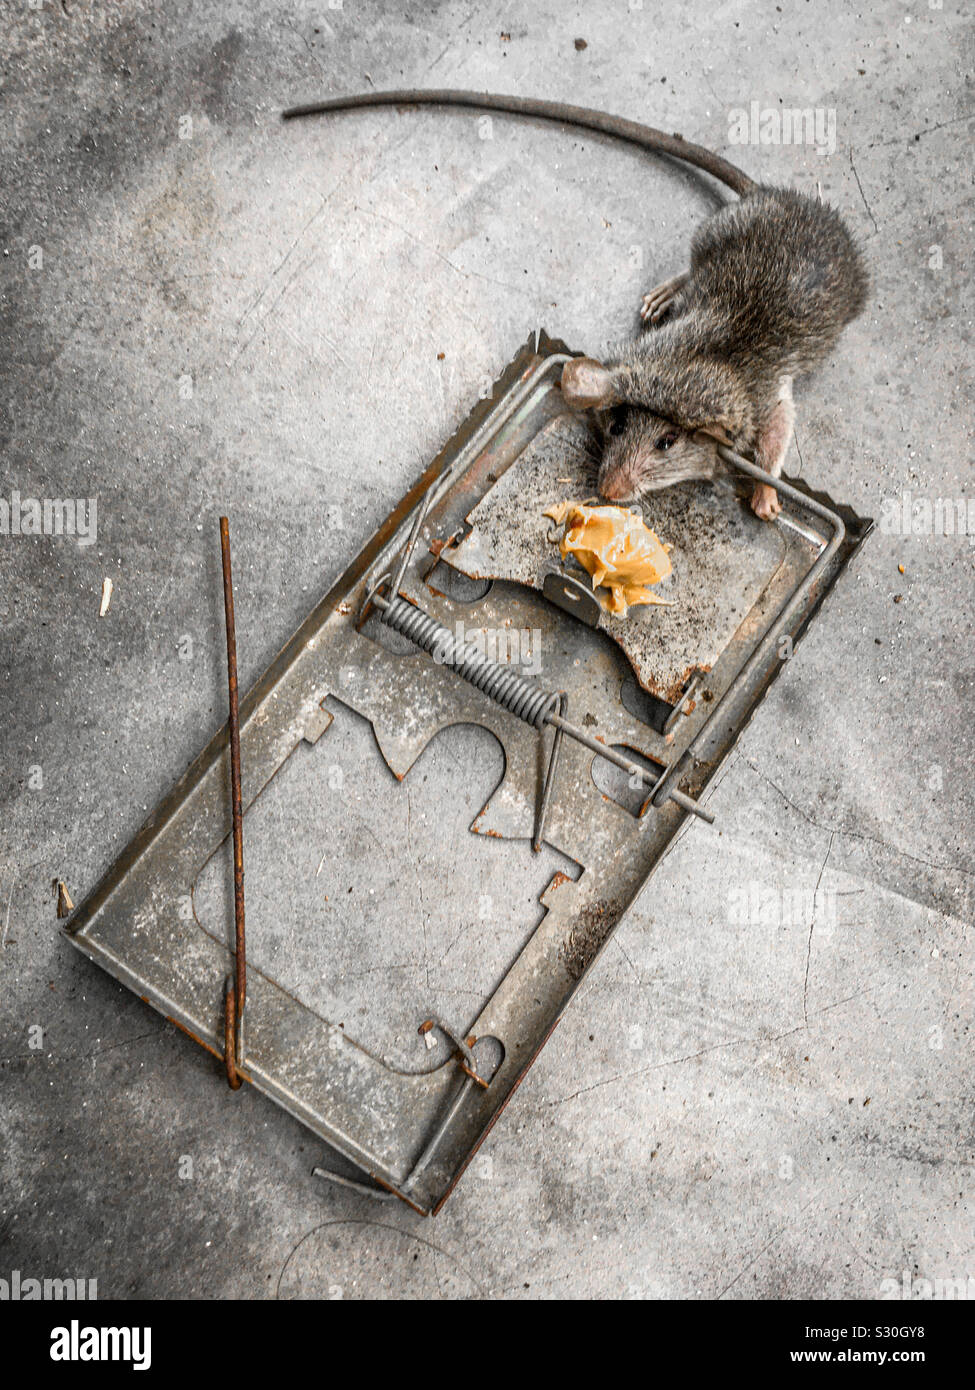 https://c8.alamy.com/comp/S30GY8/dead-rat-in-metal-spring-trap-baited-with-peanut-butter-on-concrete-floor-no-branding-S30GY8.jpg